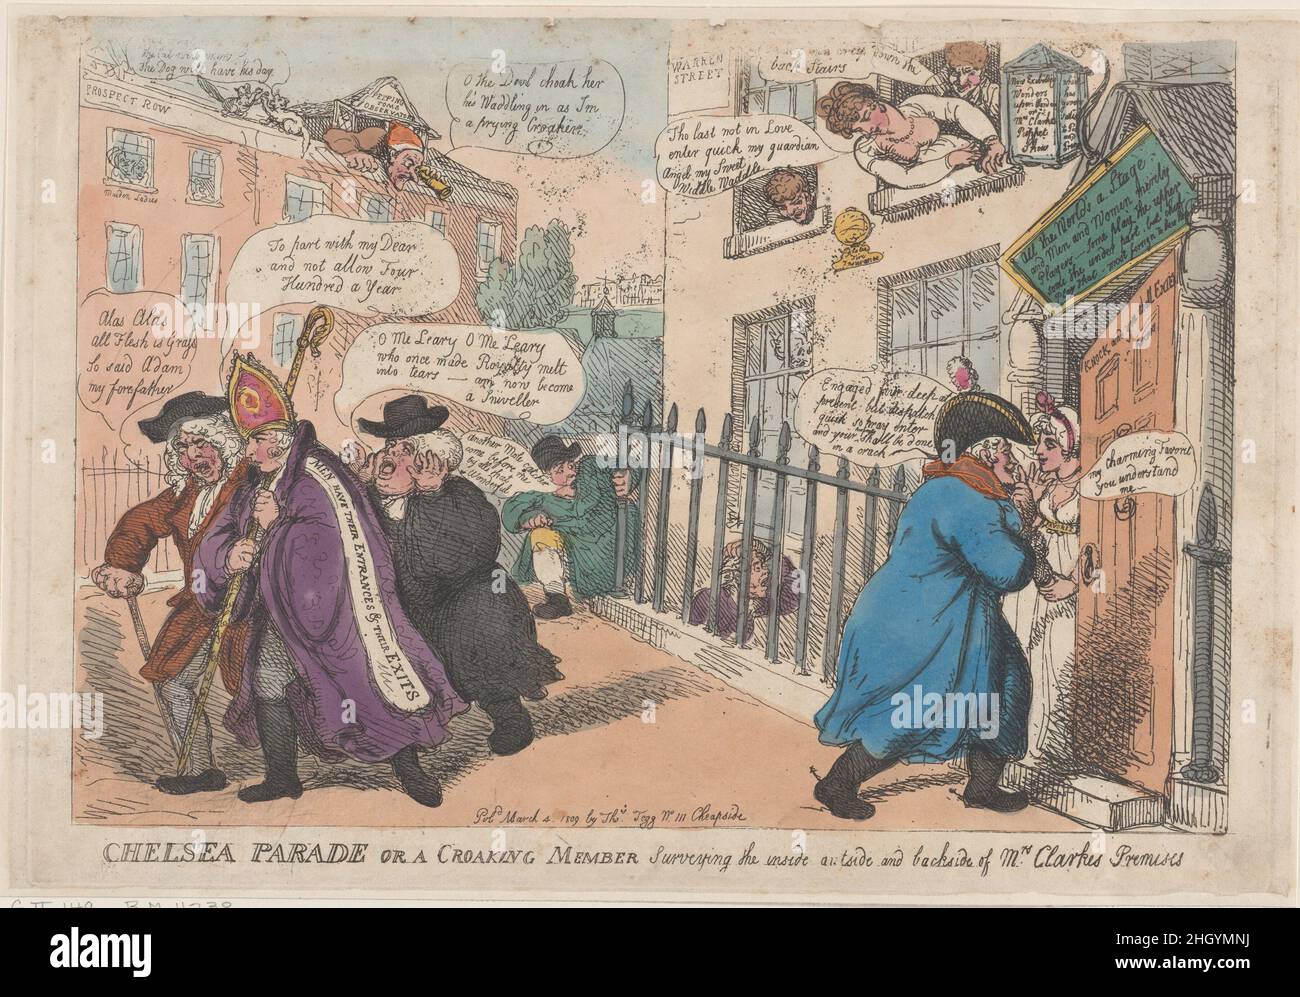 Chelsea Parade or a Croaking Member Surveying The Inside Outside and Backside of Mrs Clarke's Premises March 4, 1809 Thomas Rowlandson. Chelsea Parade or a Croaking Member Surveying The Inside Outside and Backside of Mrs Clarke's Premises. Thomas Rowlandson (British, London 1757–1827 London). March 4, 1809. Hand-colored etching. Thomas Tegg (British, 1776–1846). Prints Stock Photo